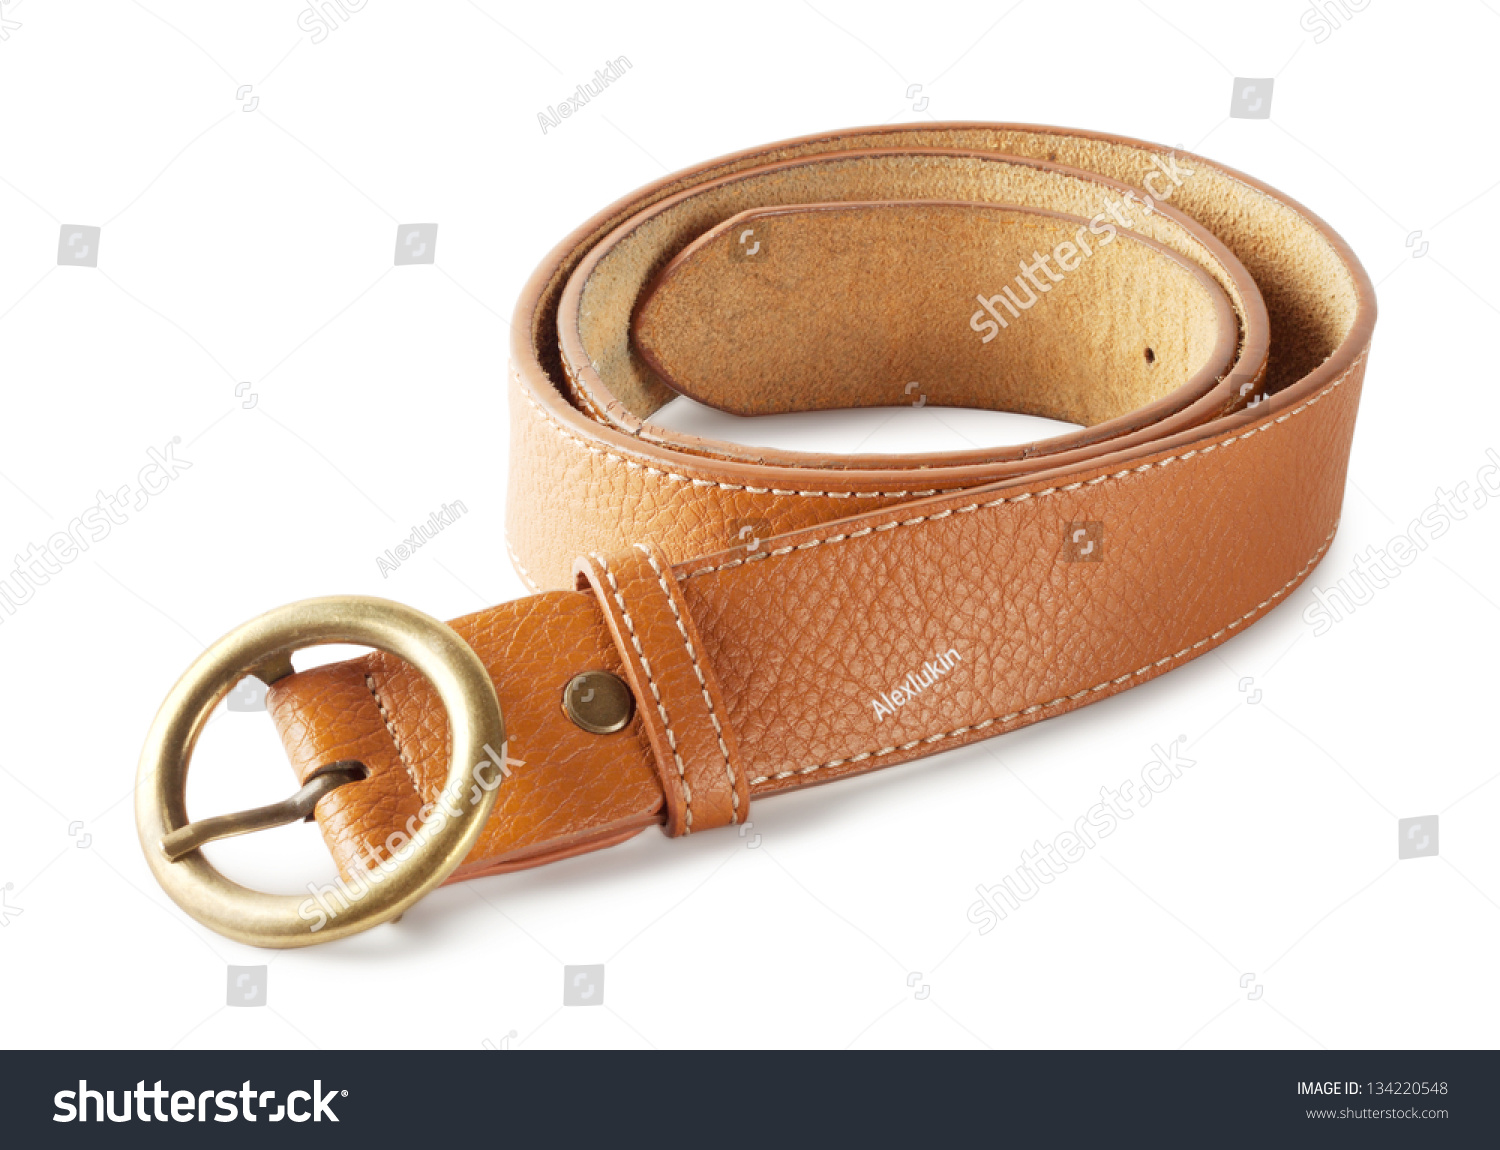 Brown Leather Belt Isolated On White Background Stock Photo 134220548 ...